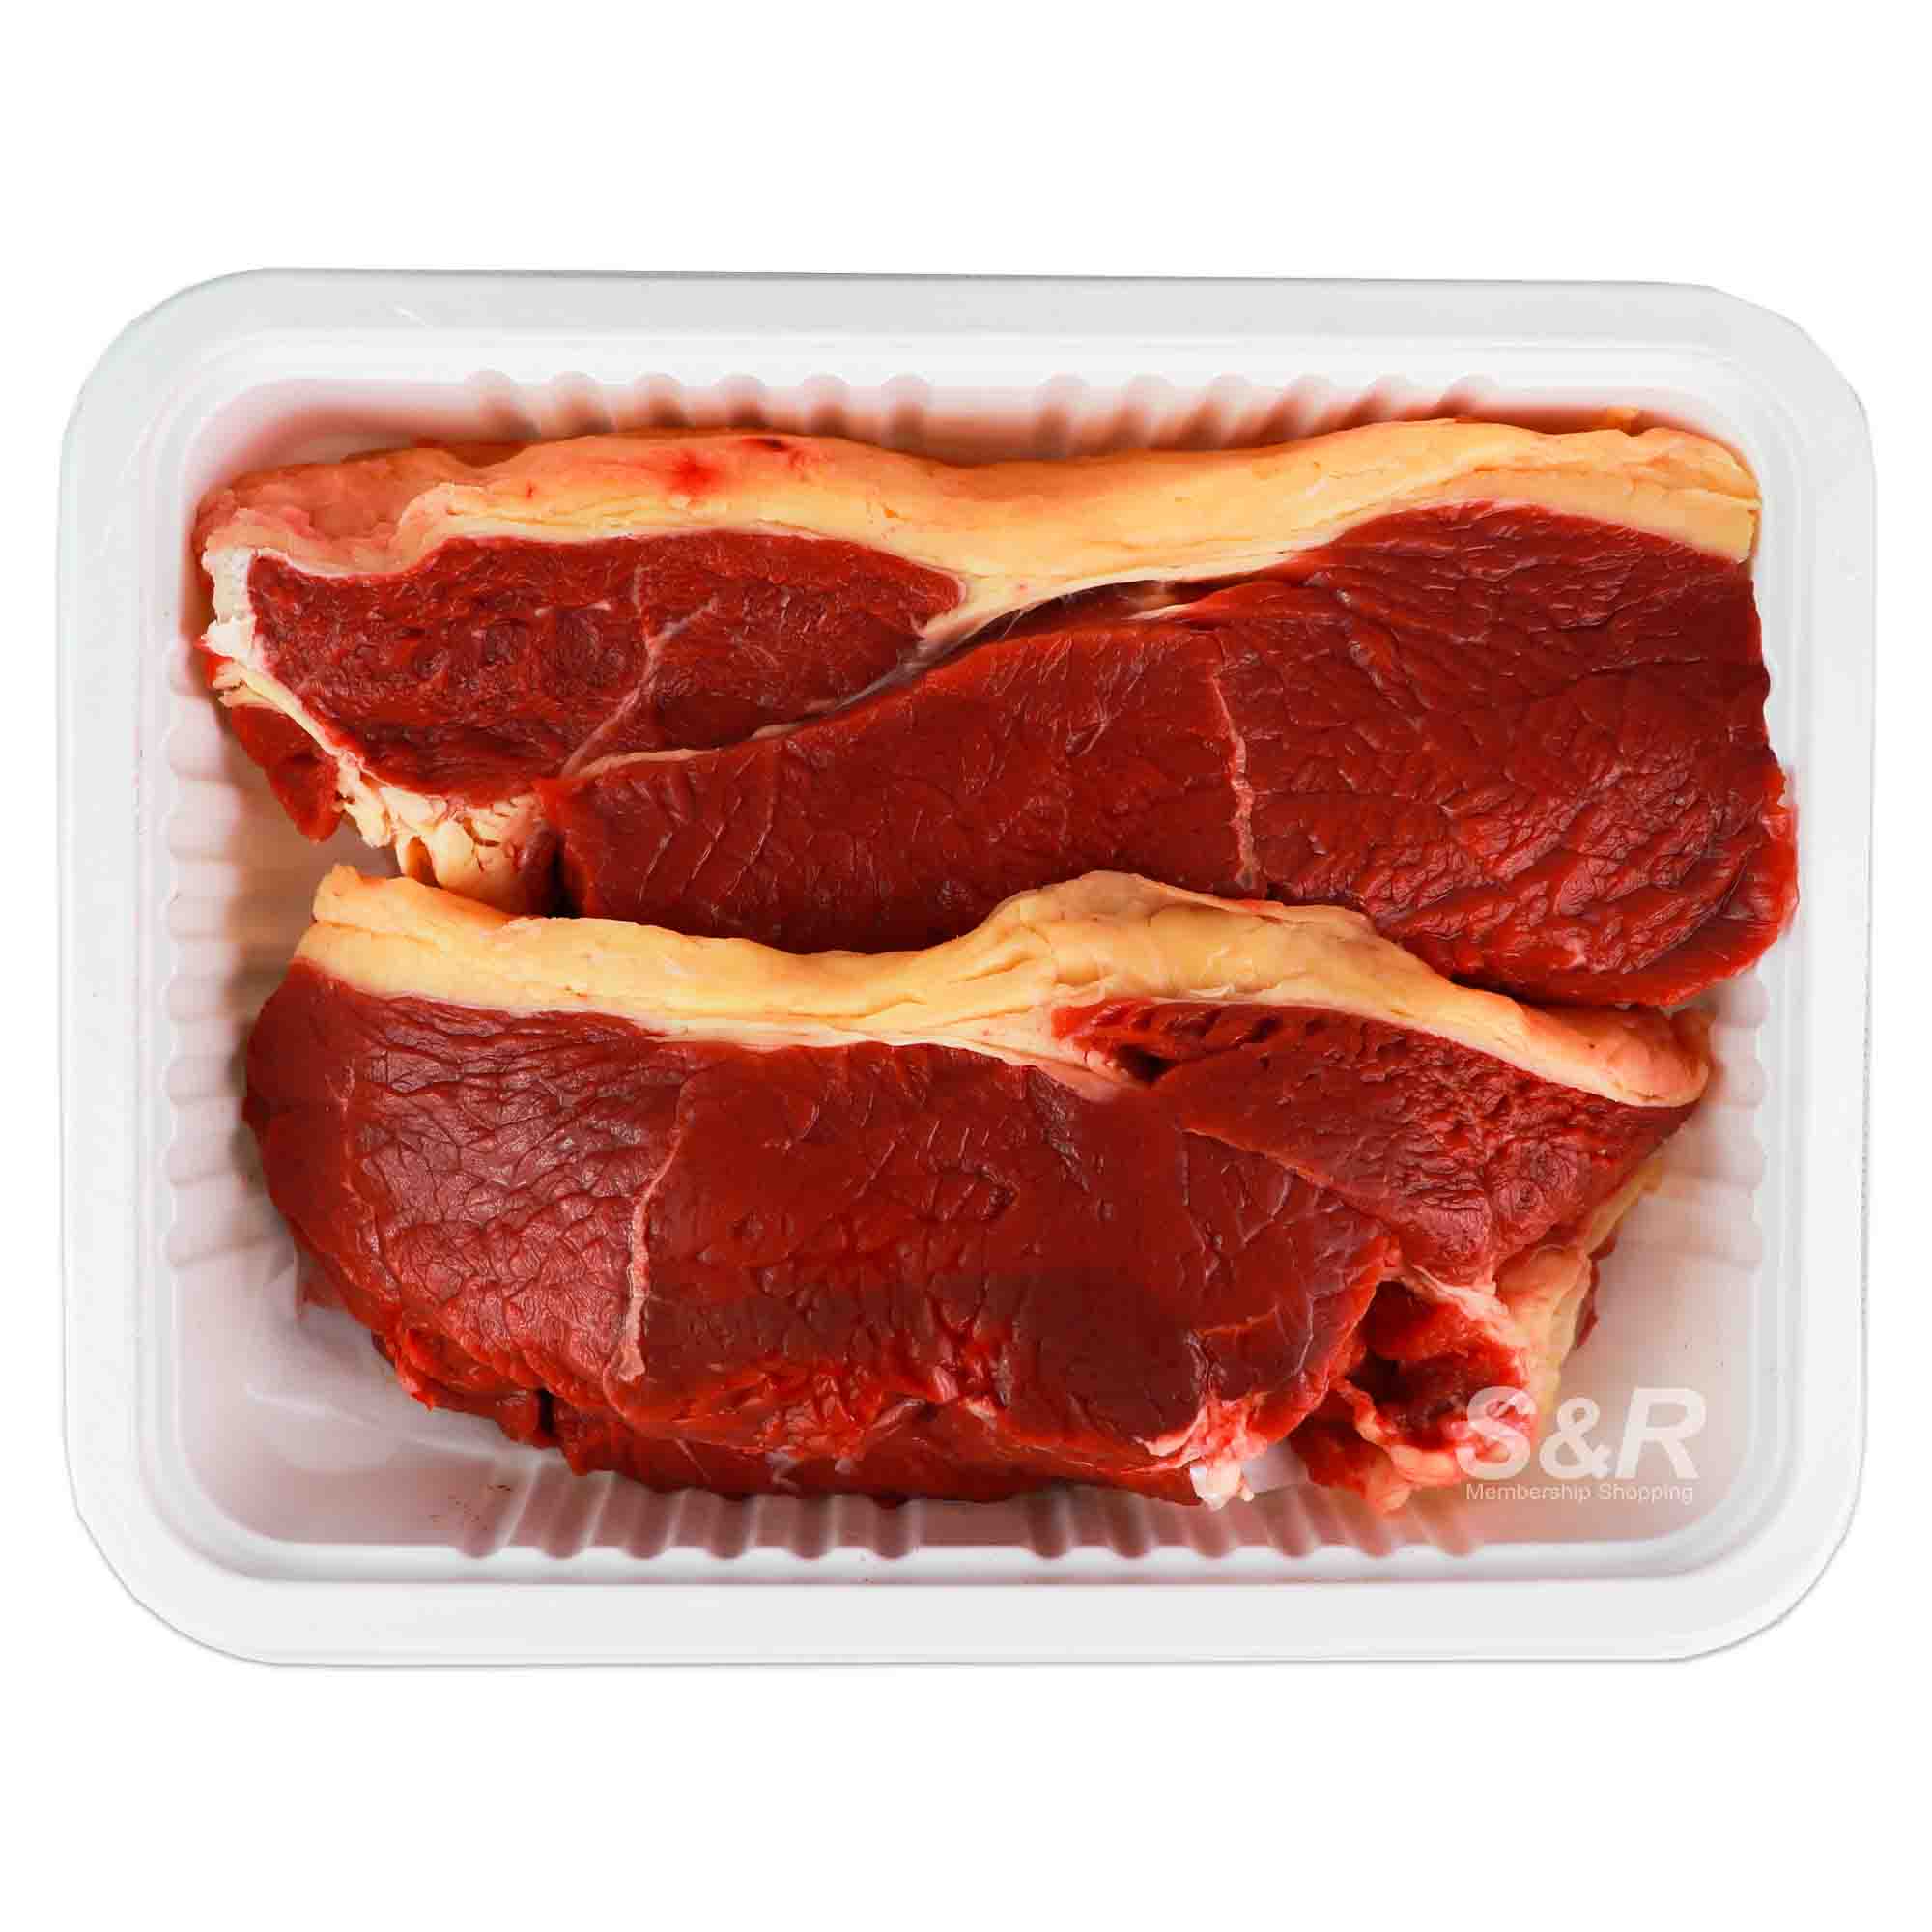 S&R Whole Beef Sirloin approx. 2kg